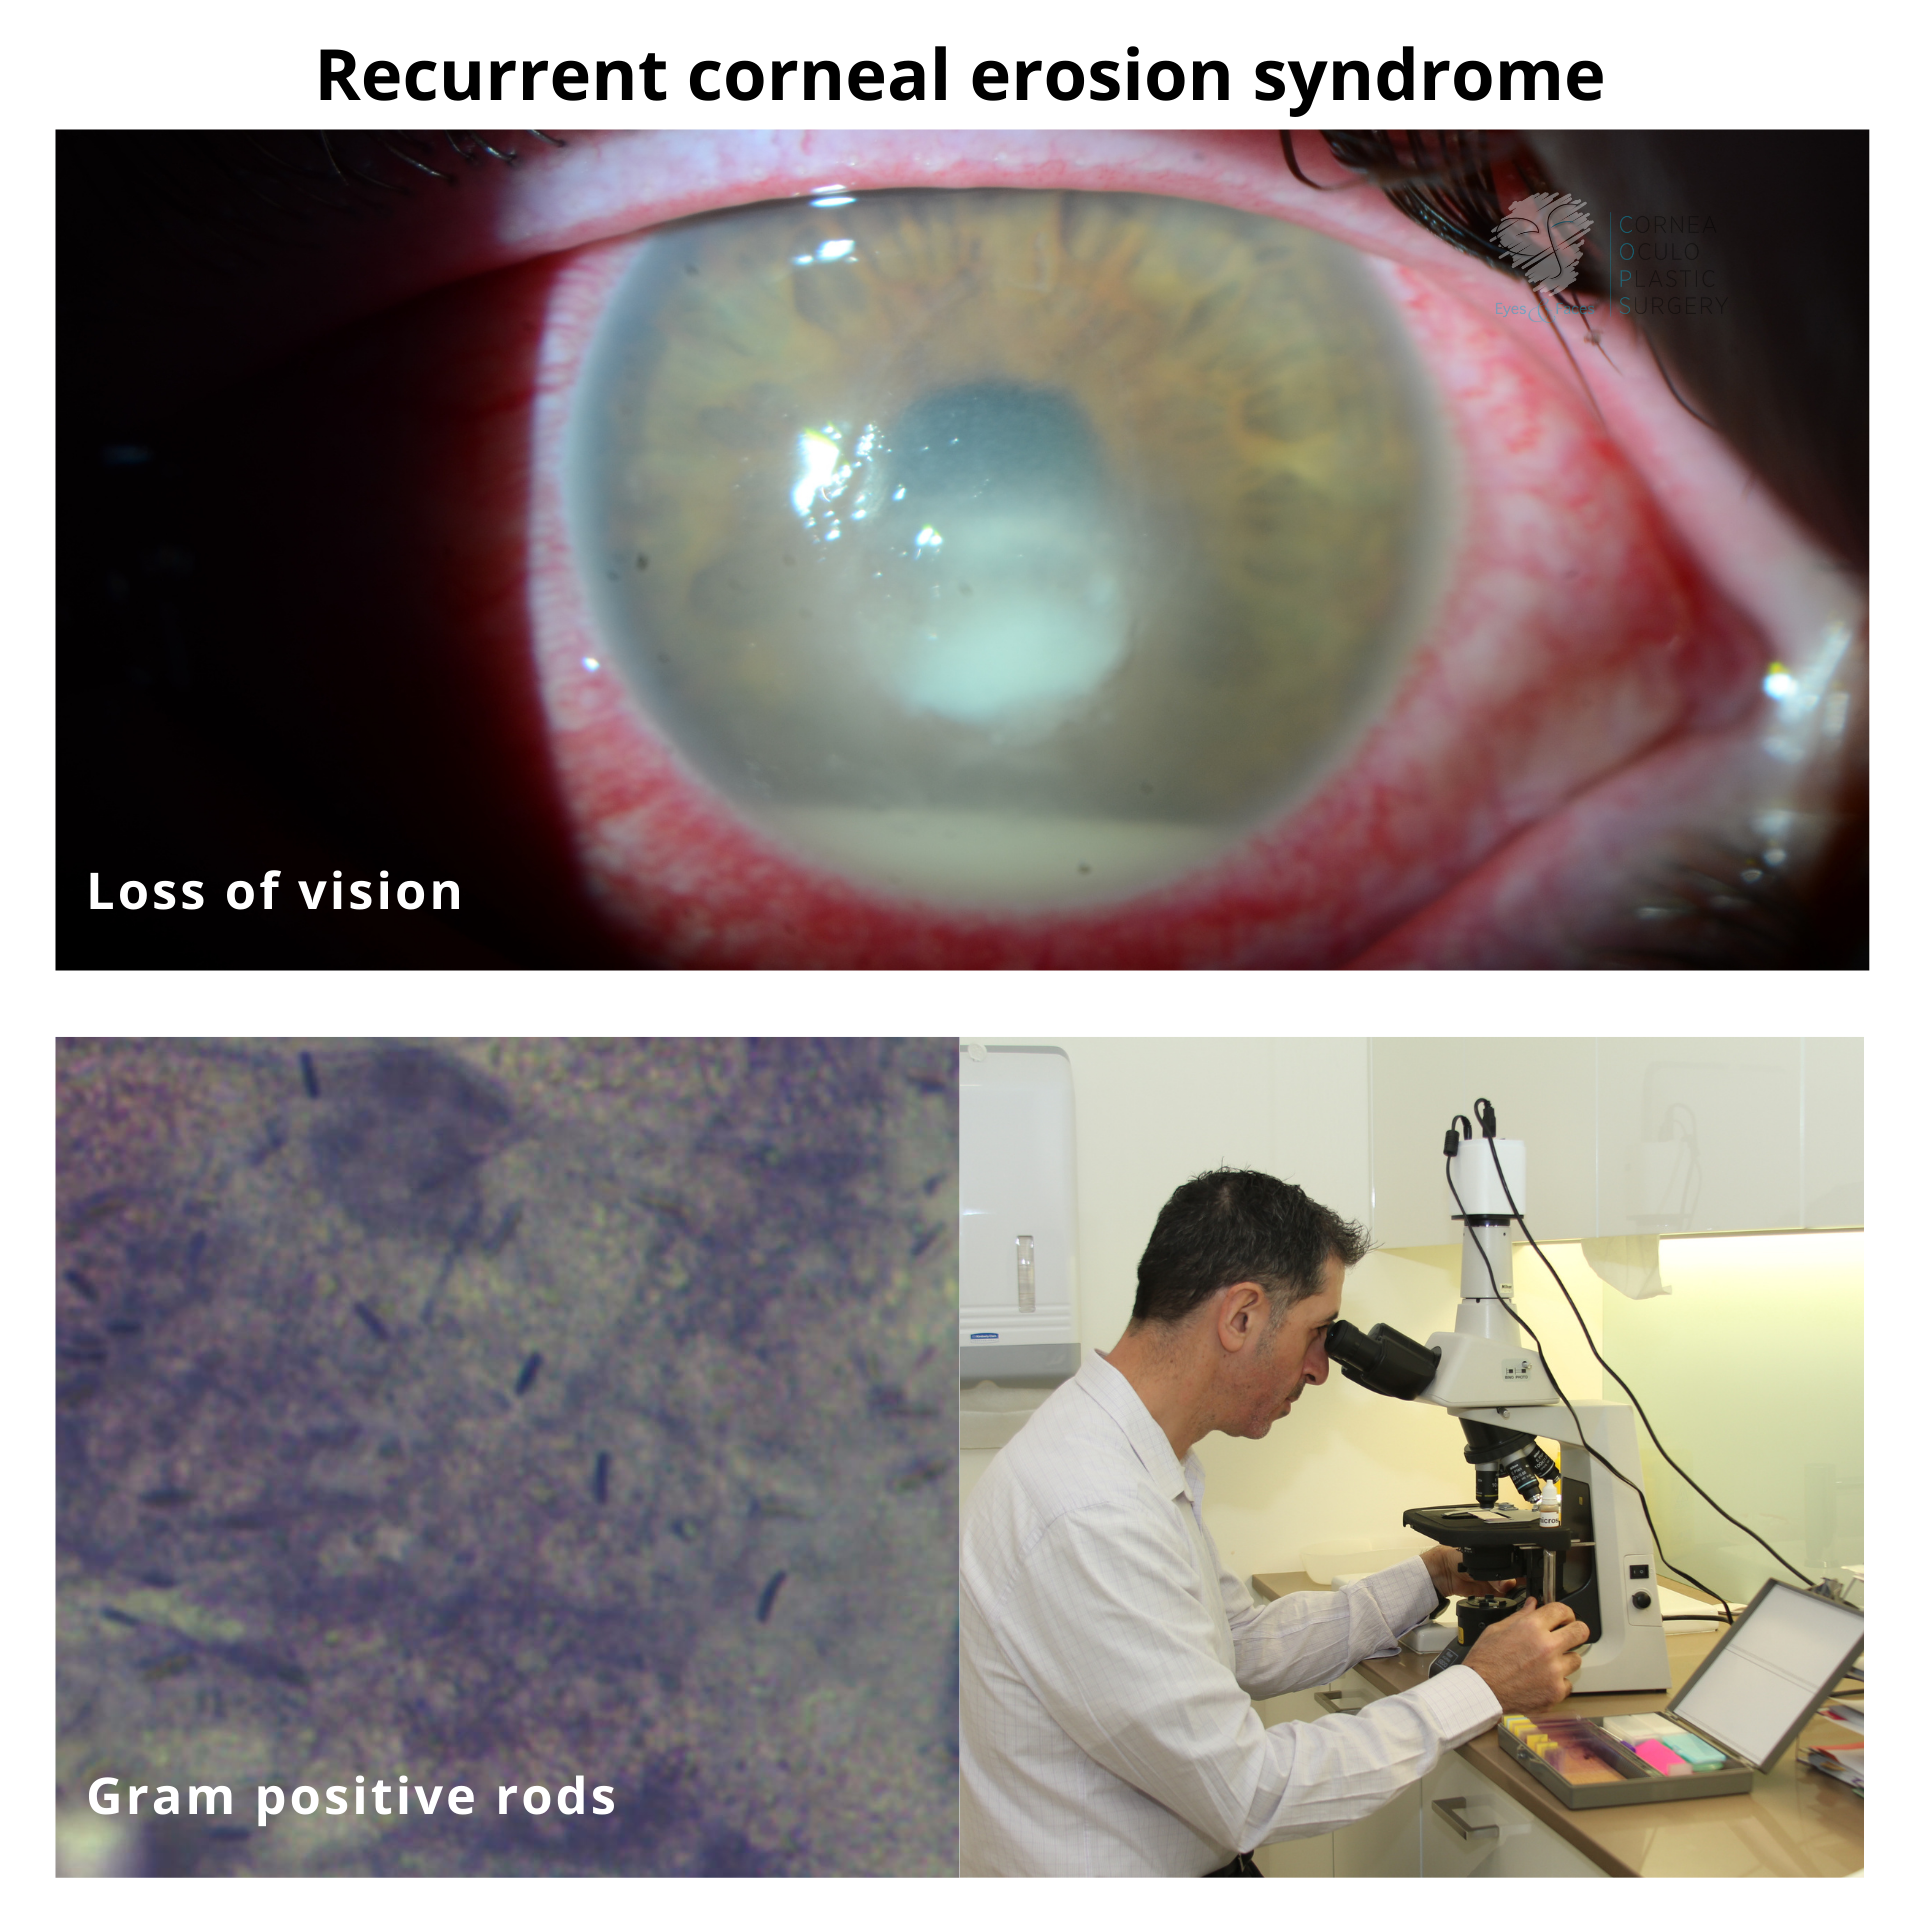 Recurrent corneal erosion syndrome with Dr Anthony Maloof looking under a microscope.